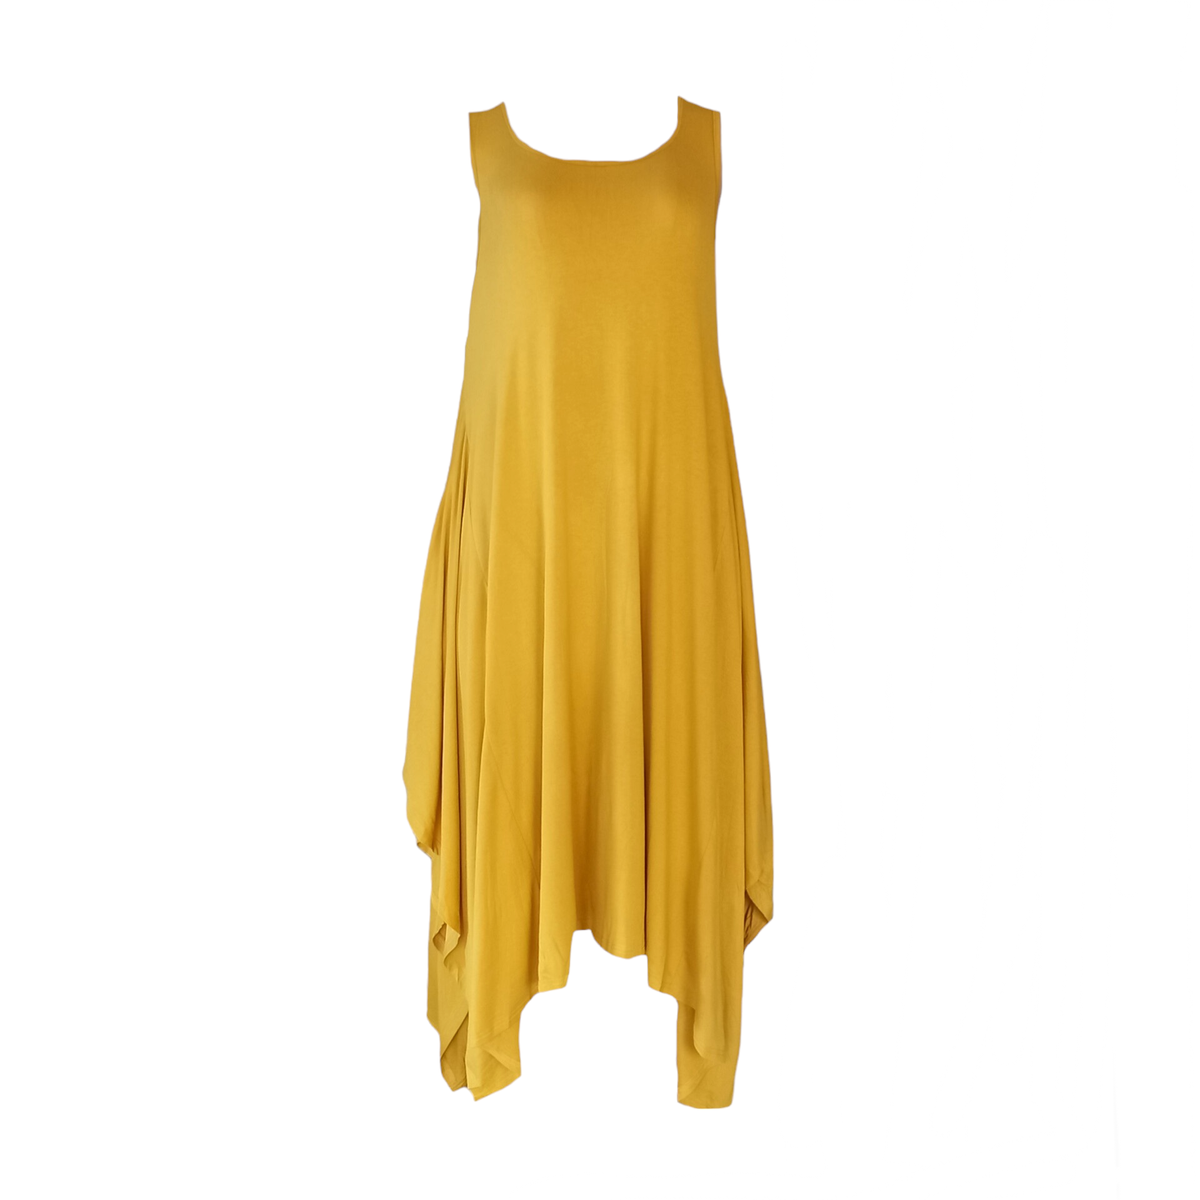 Ladies' Sleeveless Dress with side Pockets - Mustard Yellow | Shop ...